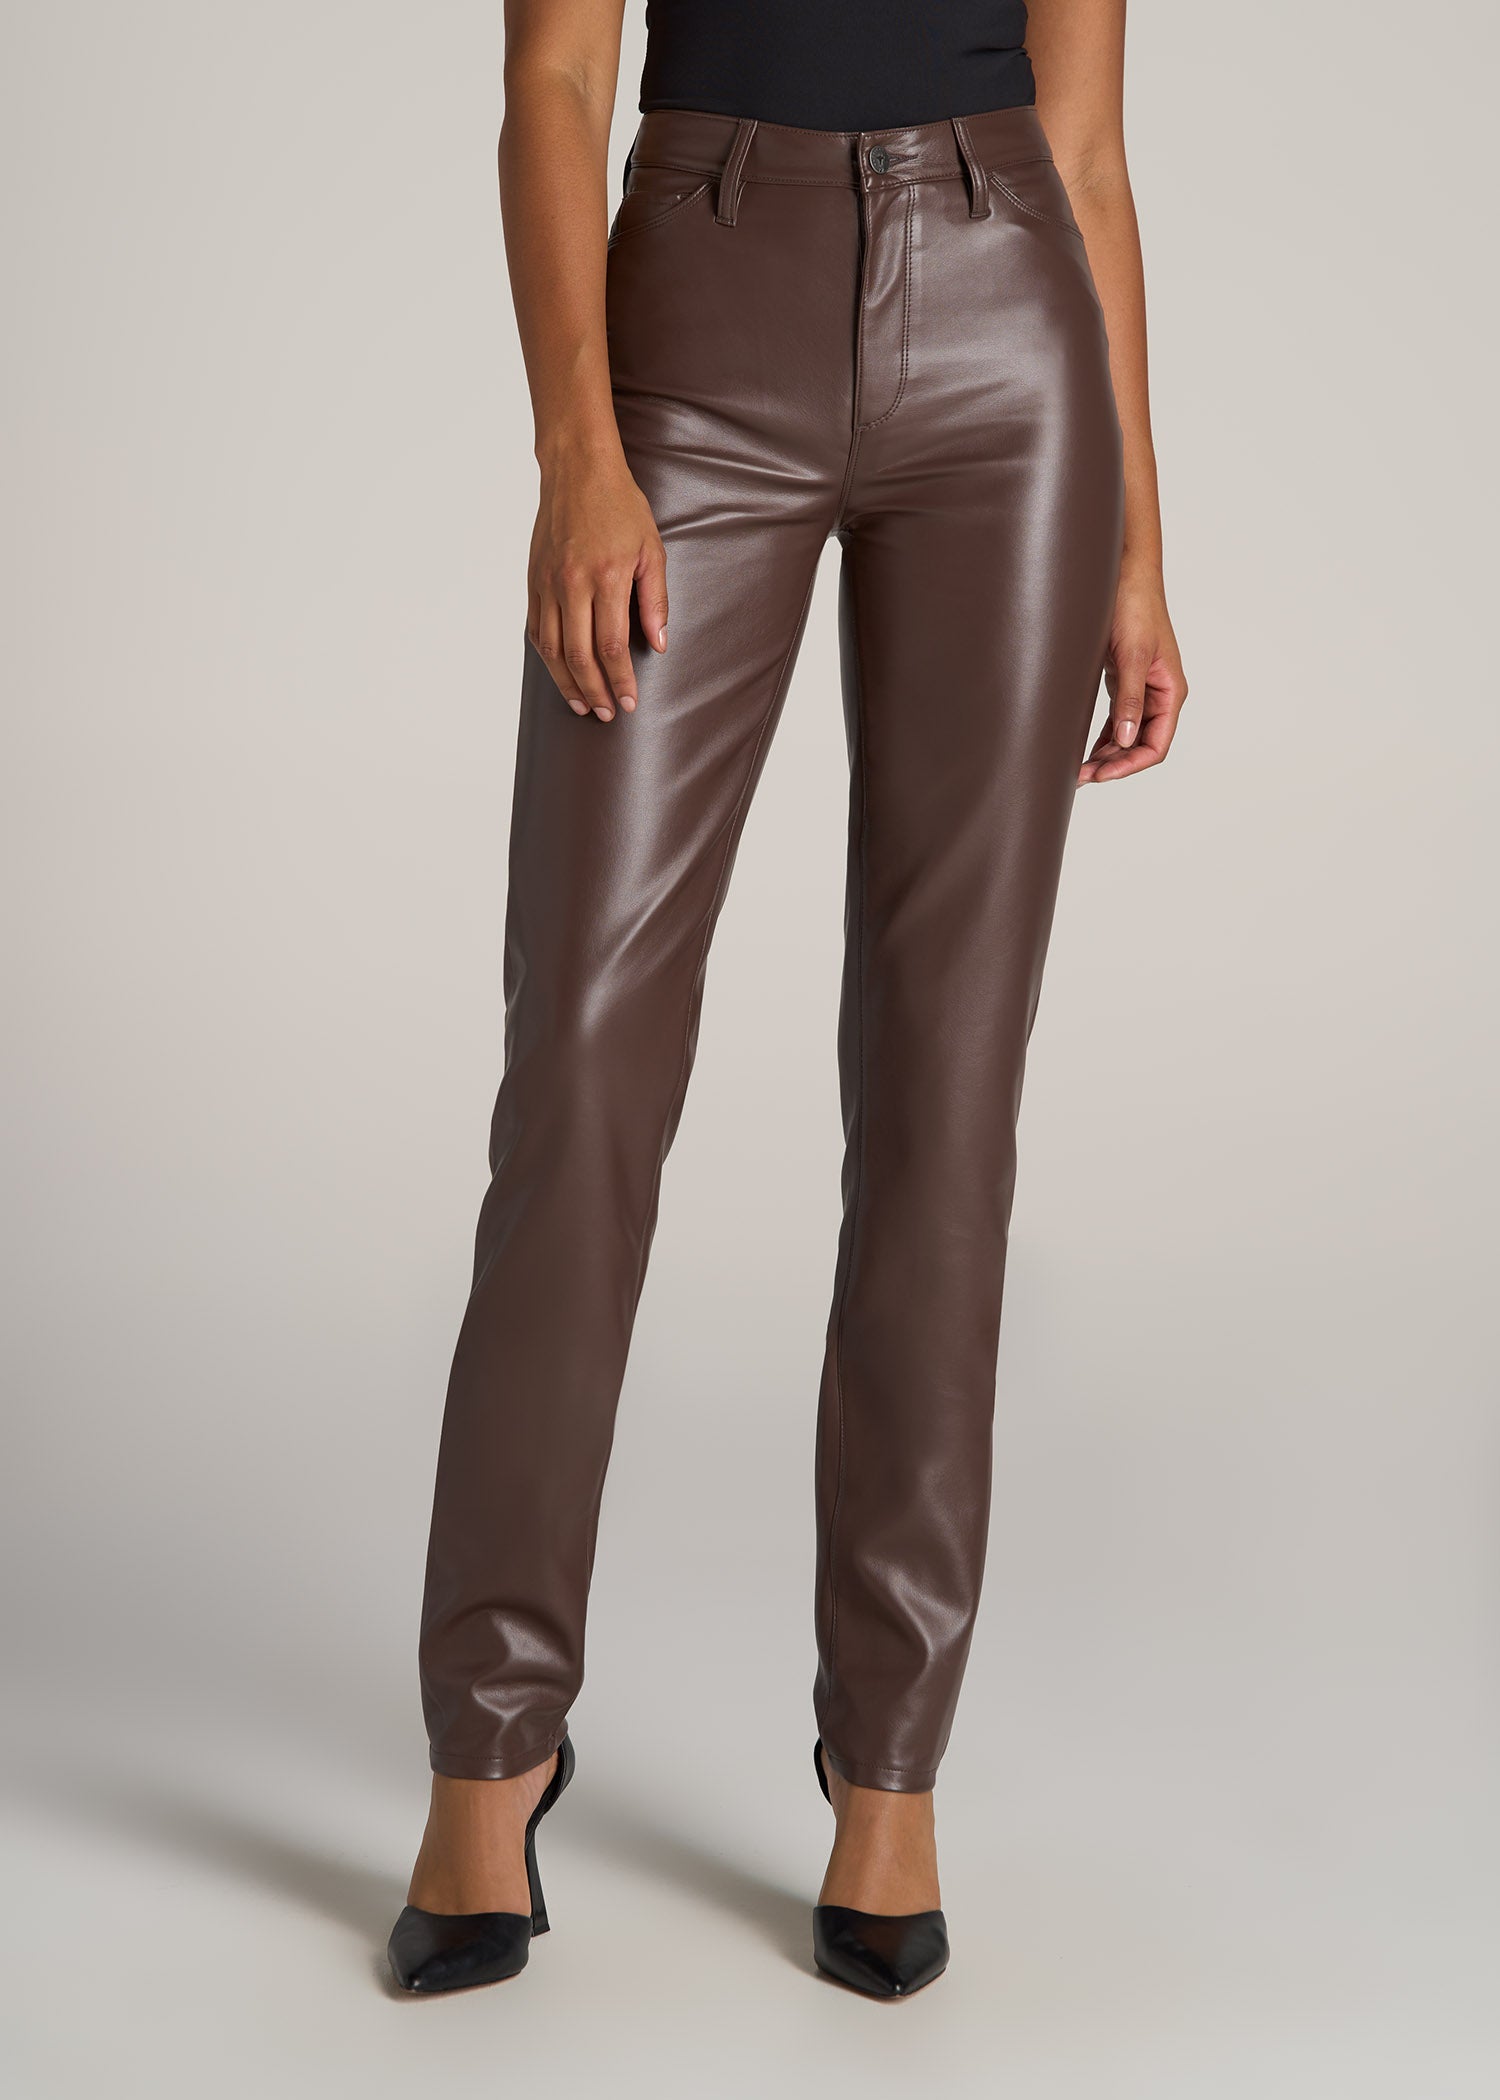 Faux Leather SLIM Pants for Tall Women in Chocolate